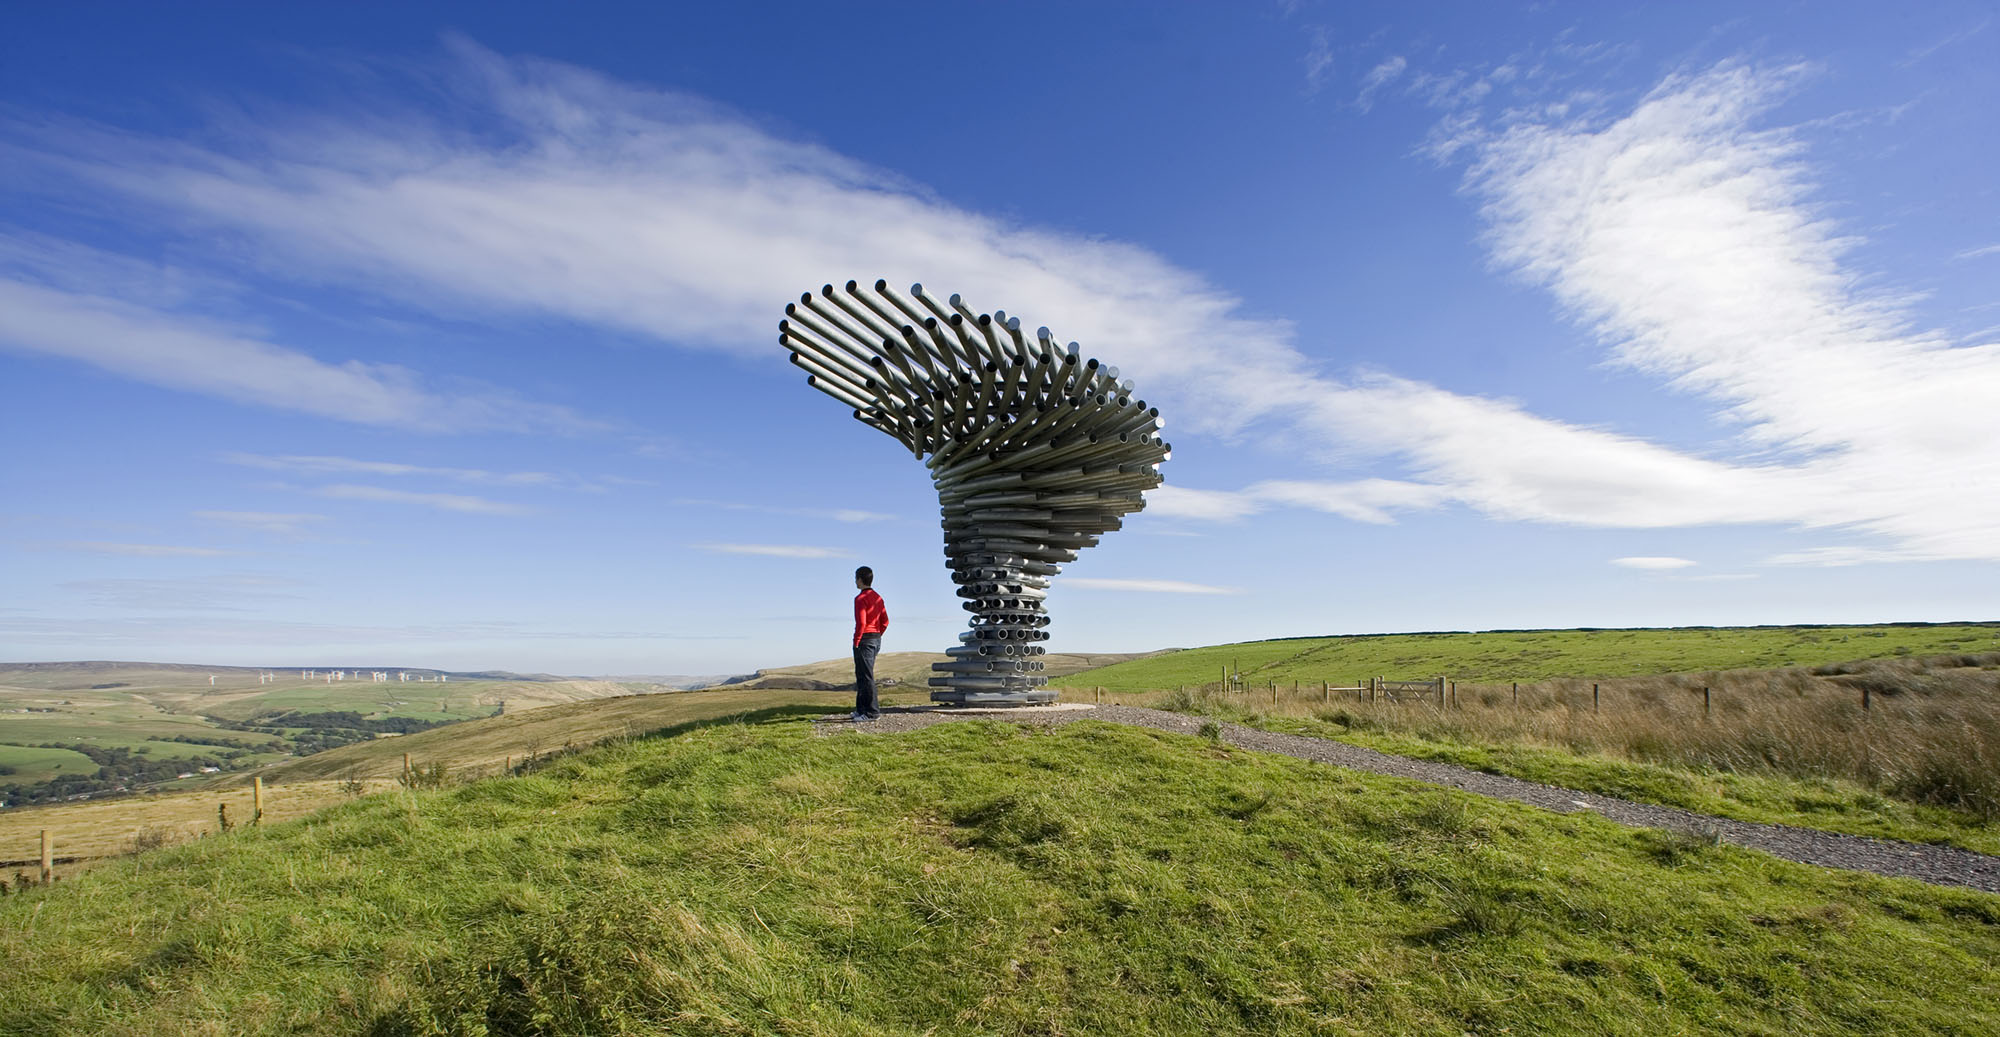 Singing-Ringing-Tree-designed-by-Tonkin-Liu-2006-commissioned-by-Mid-Pennine-Arts.-Photo-Ian-Lawson